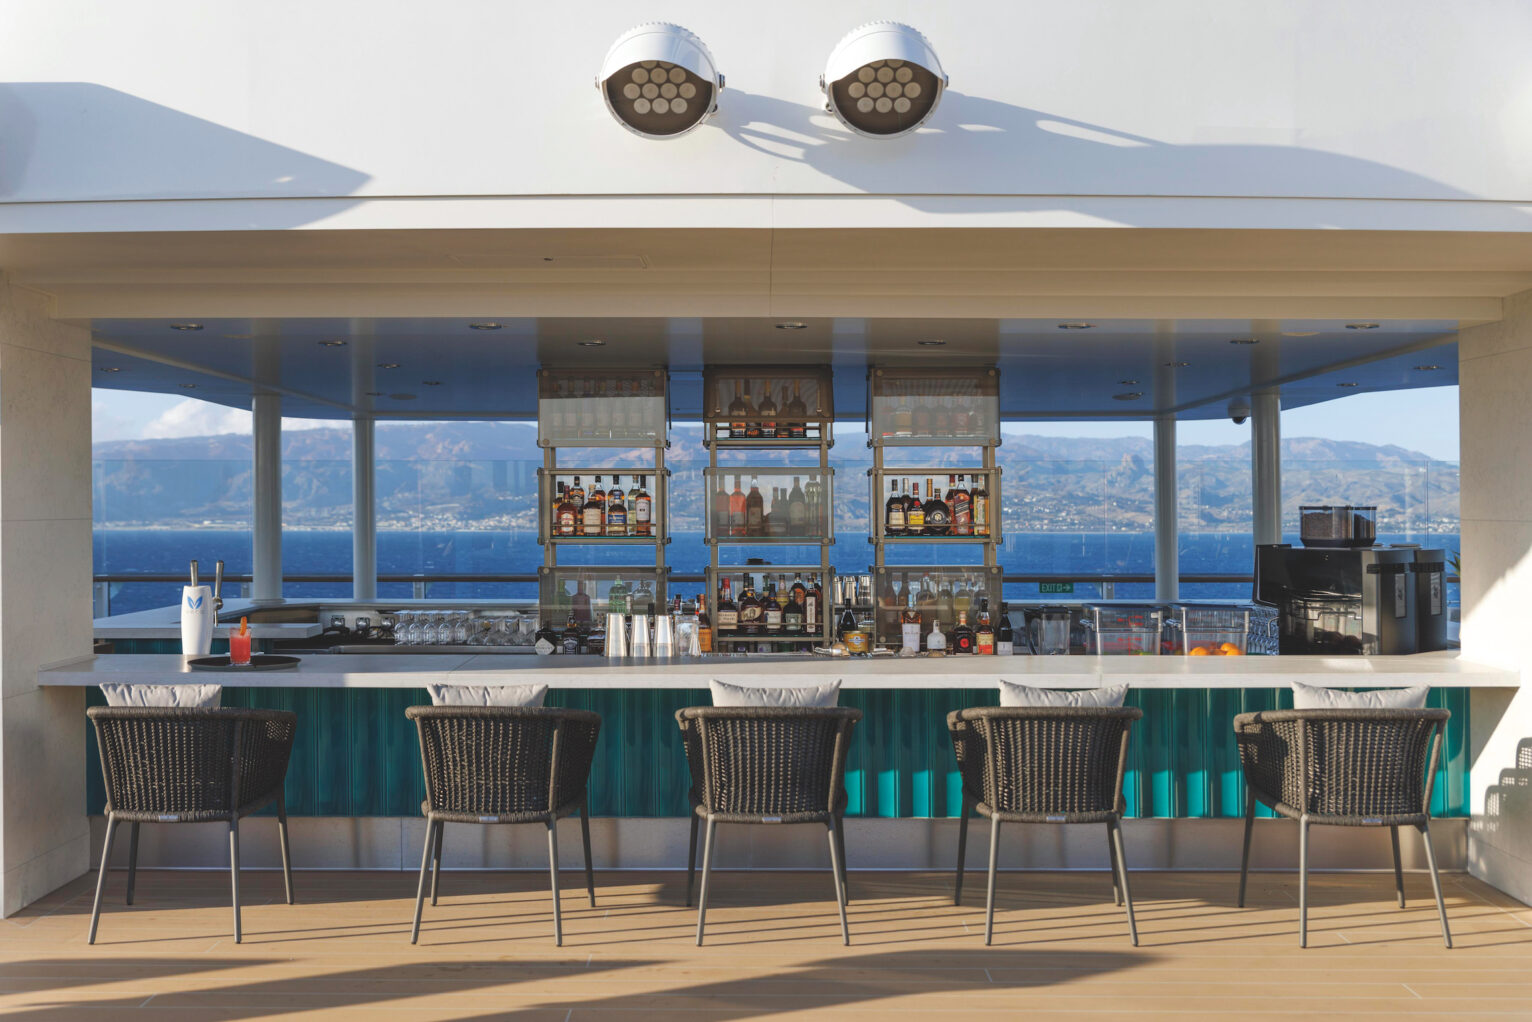 The Silver Nova Pool Bar with chairs facing a bar and blue sea int he bakground.